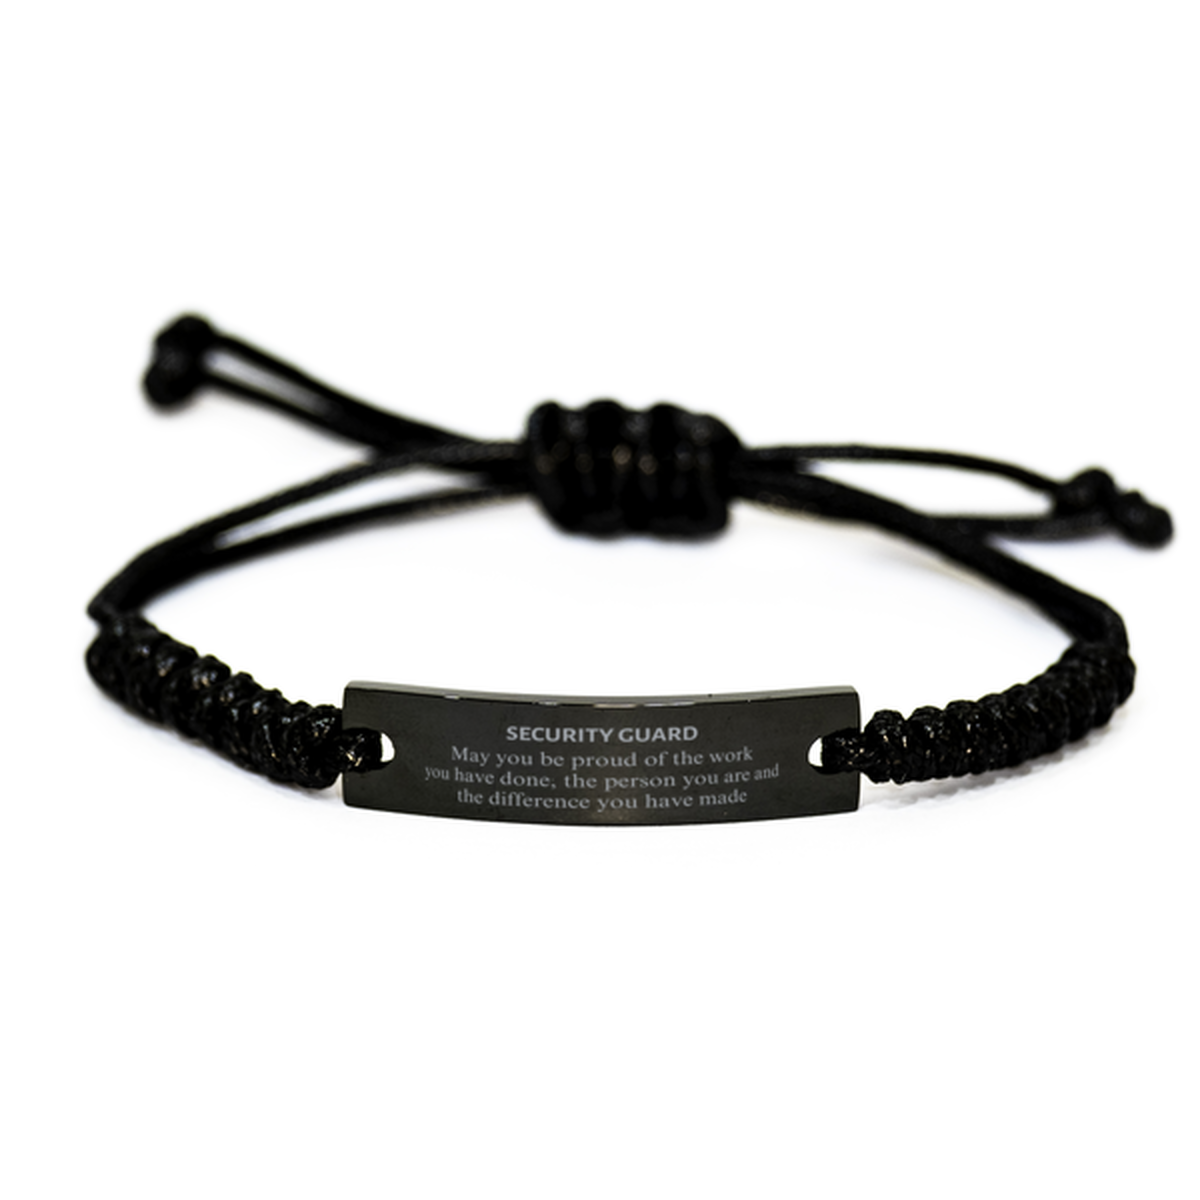 Security Guard May you be proud of the work you have done, Retirement Security Guard Black Rope Bracelet for Colleague Appreciation Gifts Amazing for Security Guard